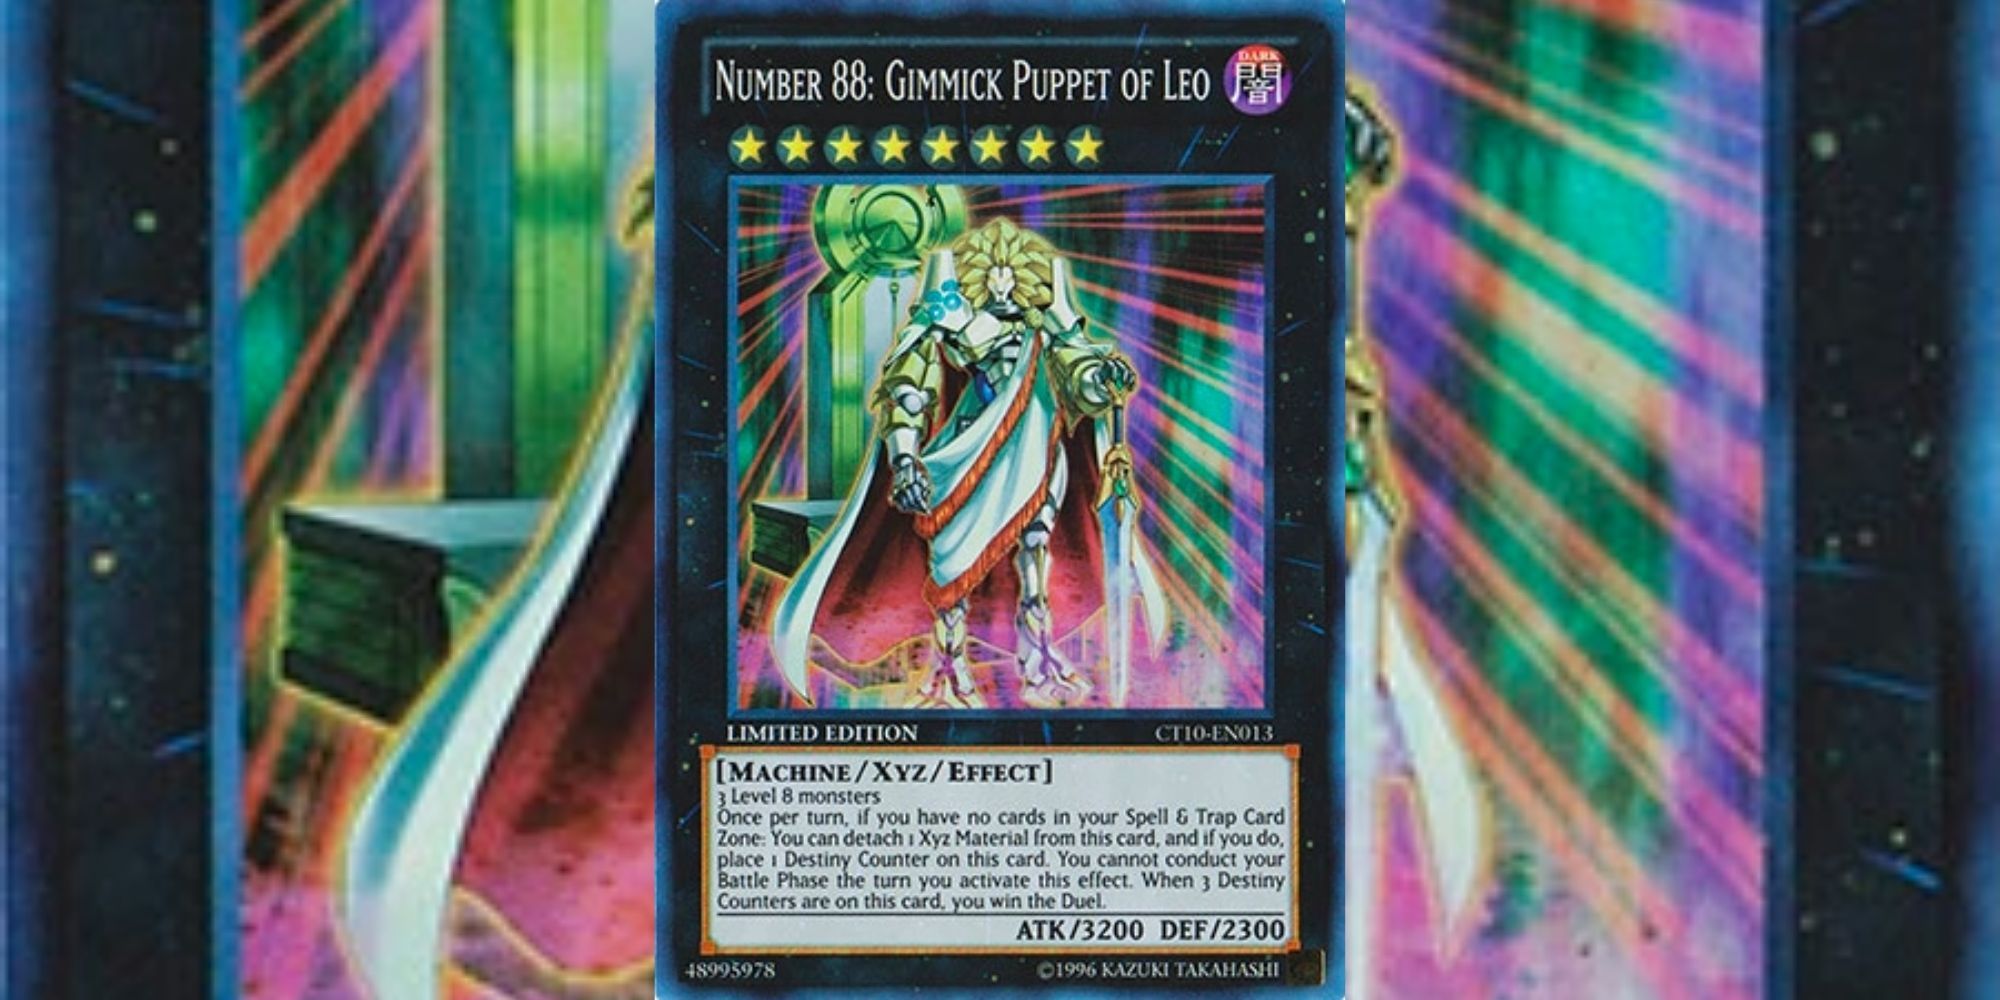 Number 88: Gimmick Puppet Of Leo card in Yu-Gi-Oh!